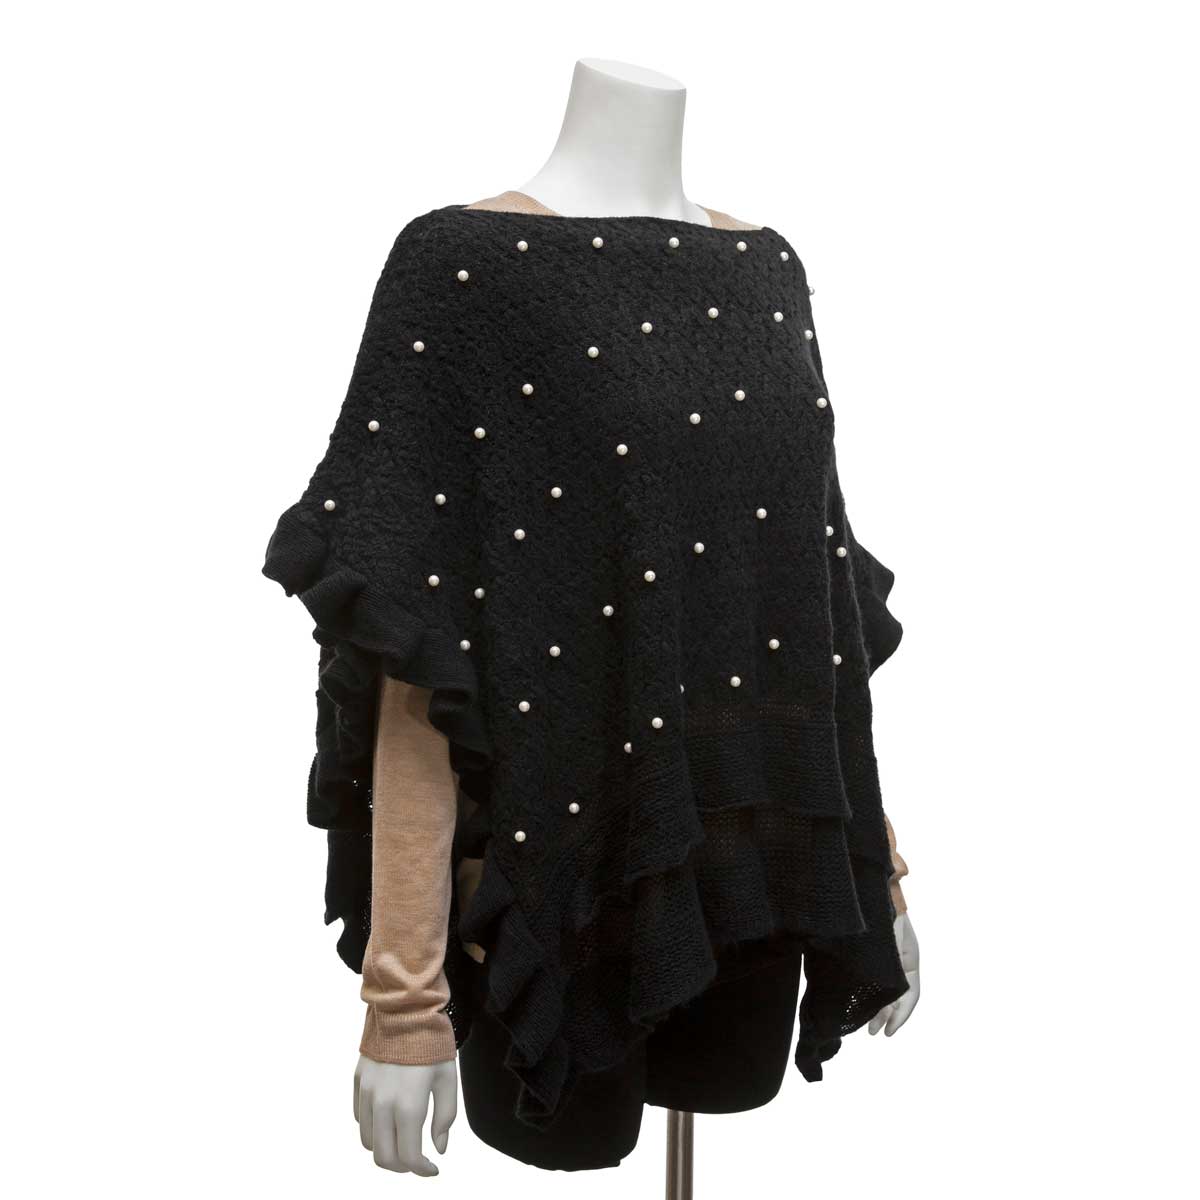 PONCHO WITH PEARLS BLACK 20IN X 40IN ONE SIZE FITS MOST KNIT